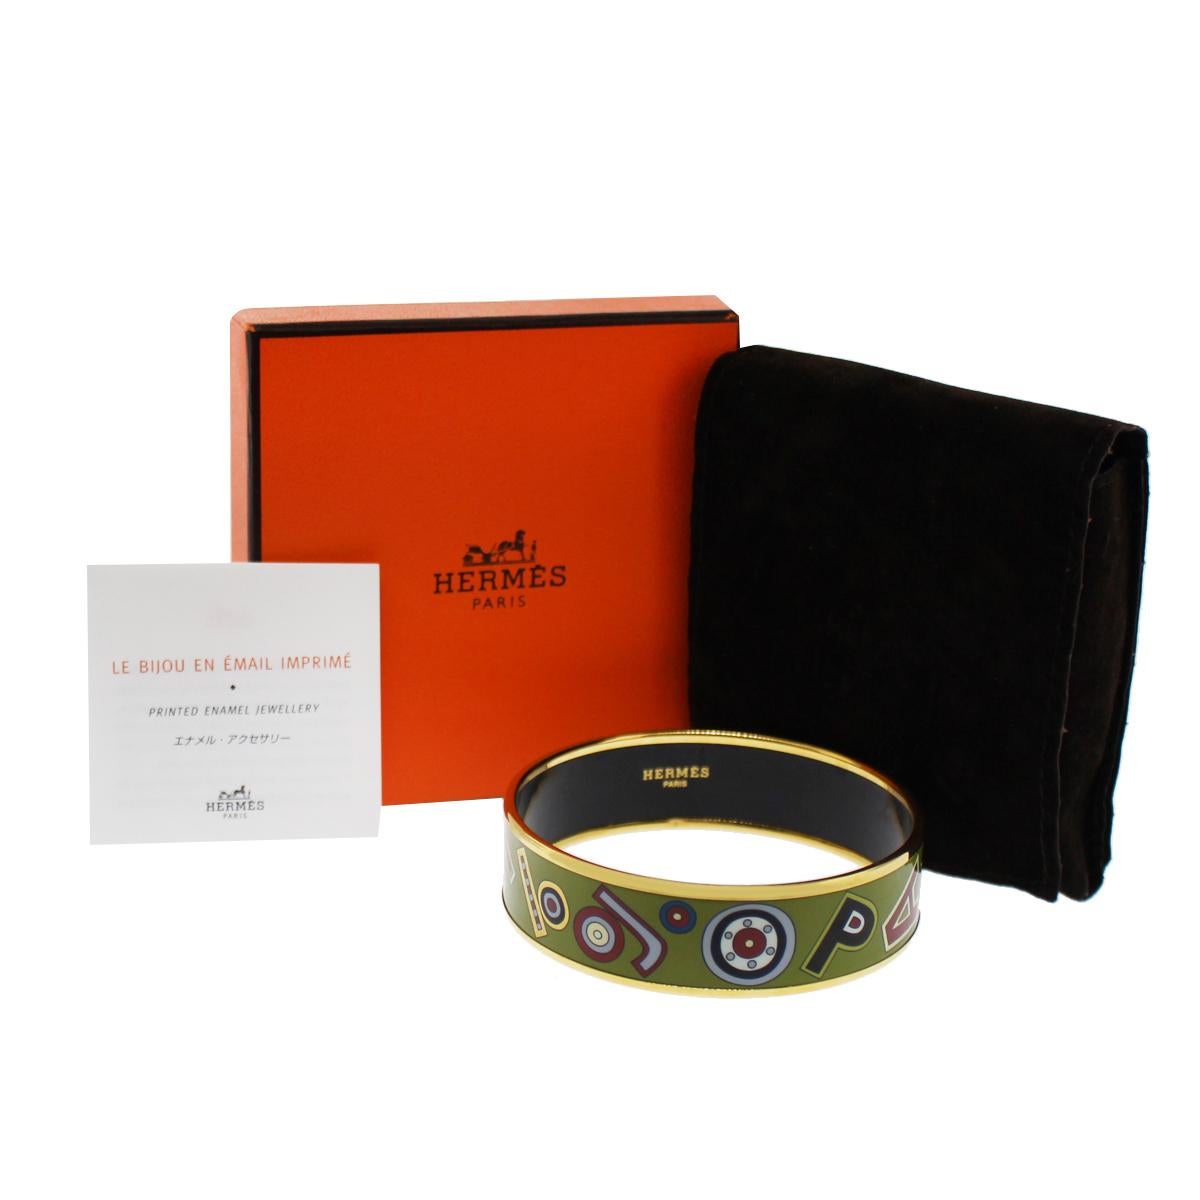 Brand: Hermes
Measurements: 8.25″
Clasp: Bangle
Total Weight: 41.4g (26.4dwt)
Additional Details: This item comes with Original Hermes box
SKU: G9530